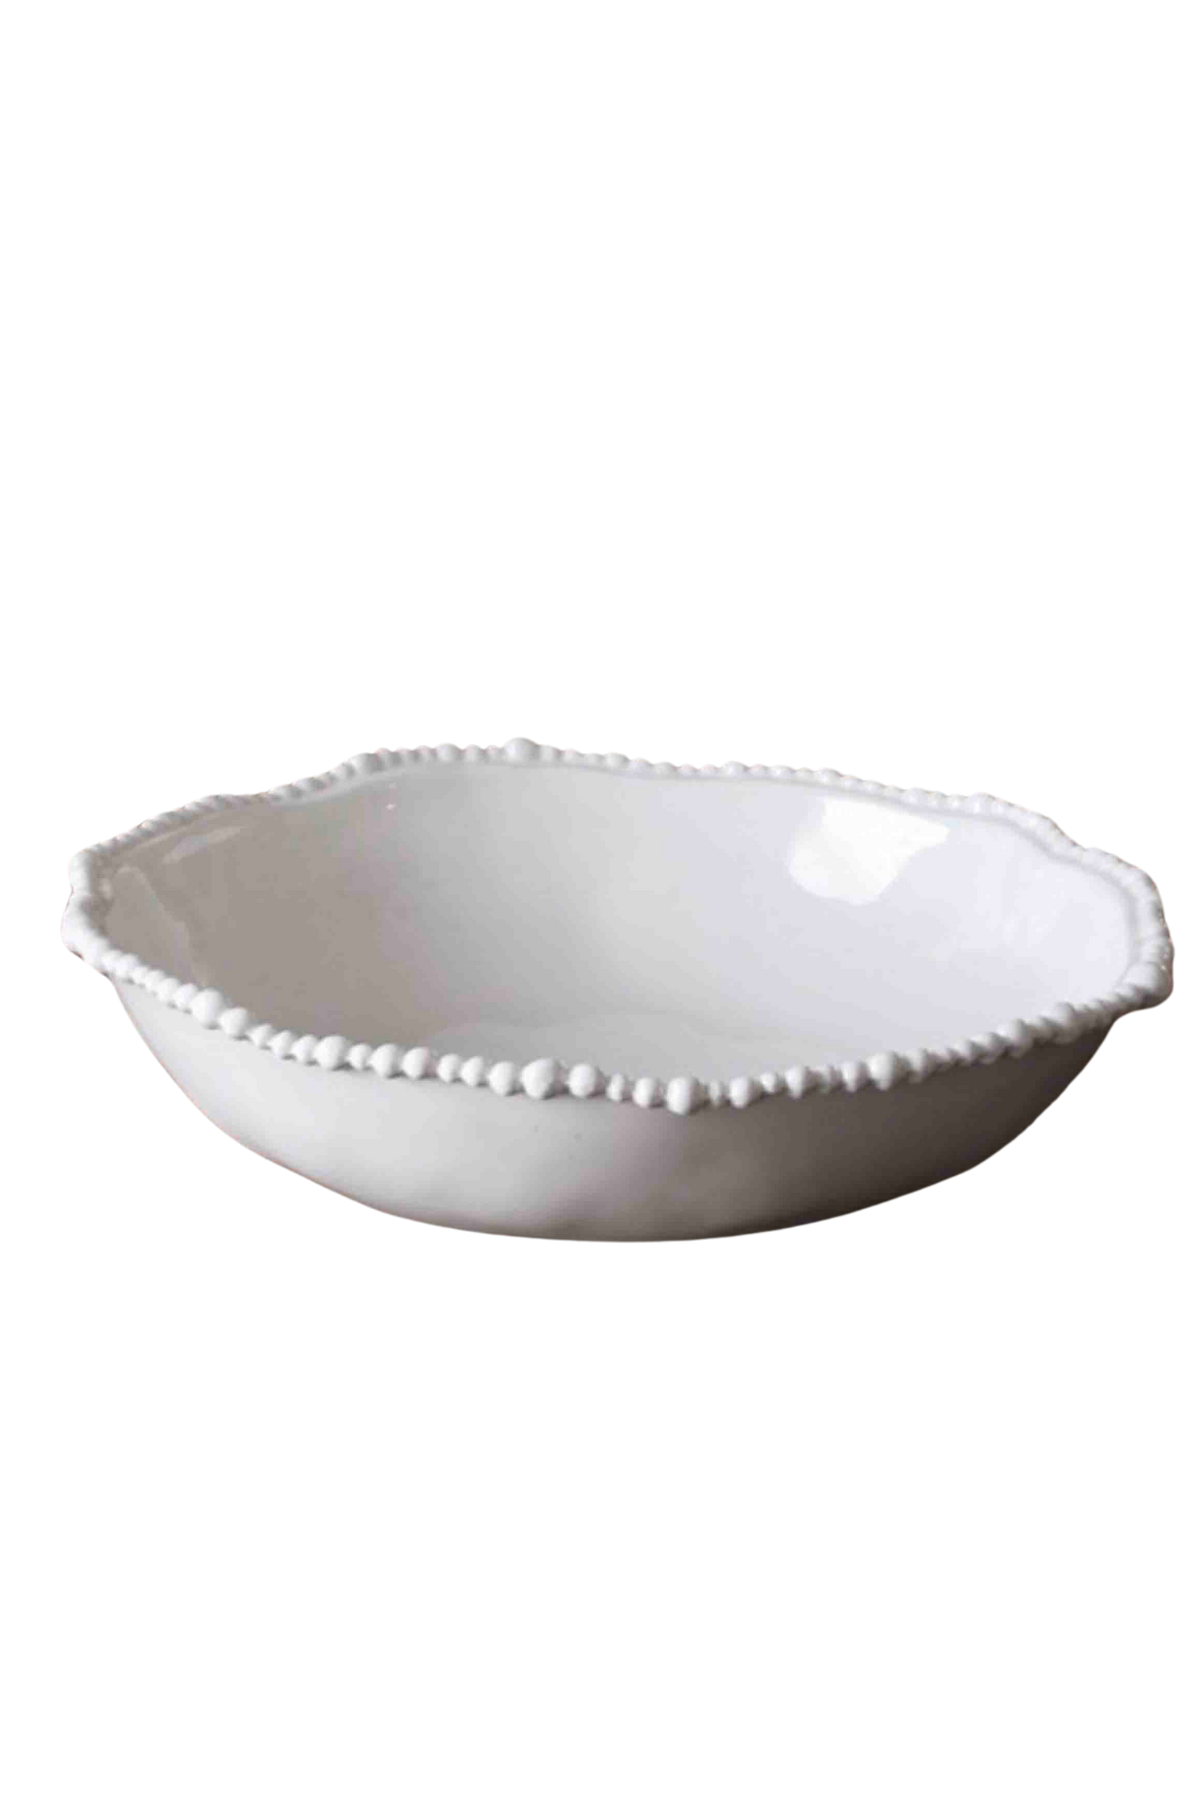 VIDA Alegria Large Pasta Bowl by Beatriz Ball in high end Melamine with a pearl rim.